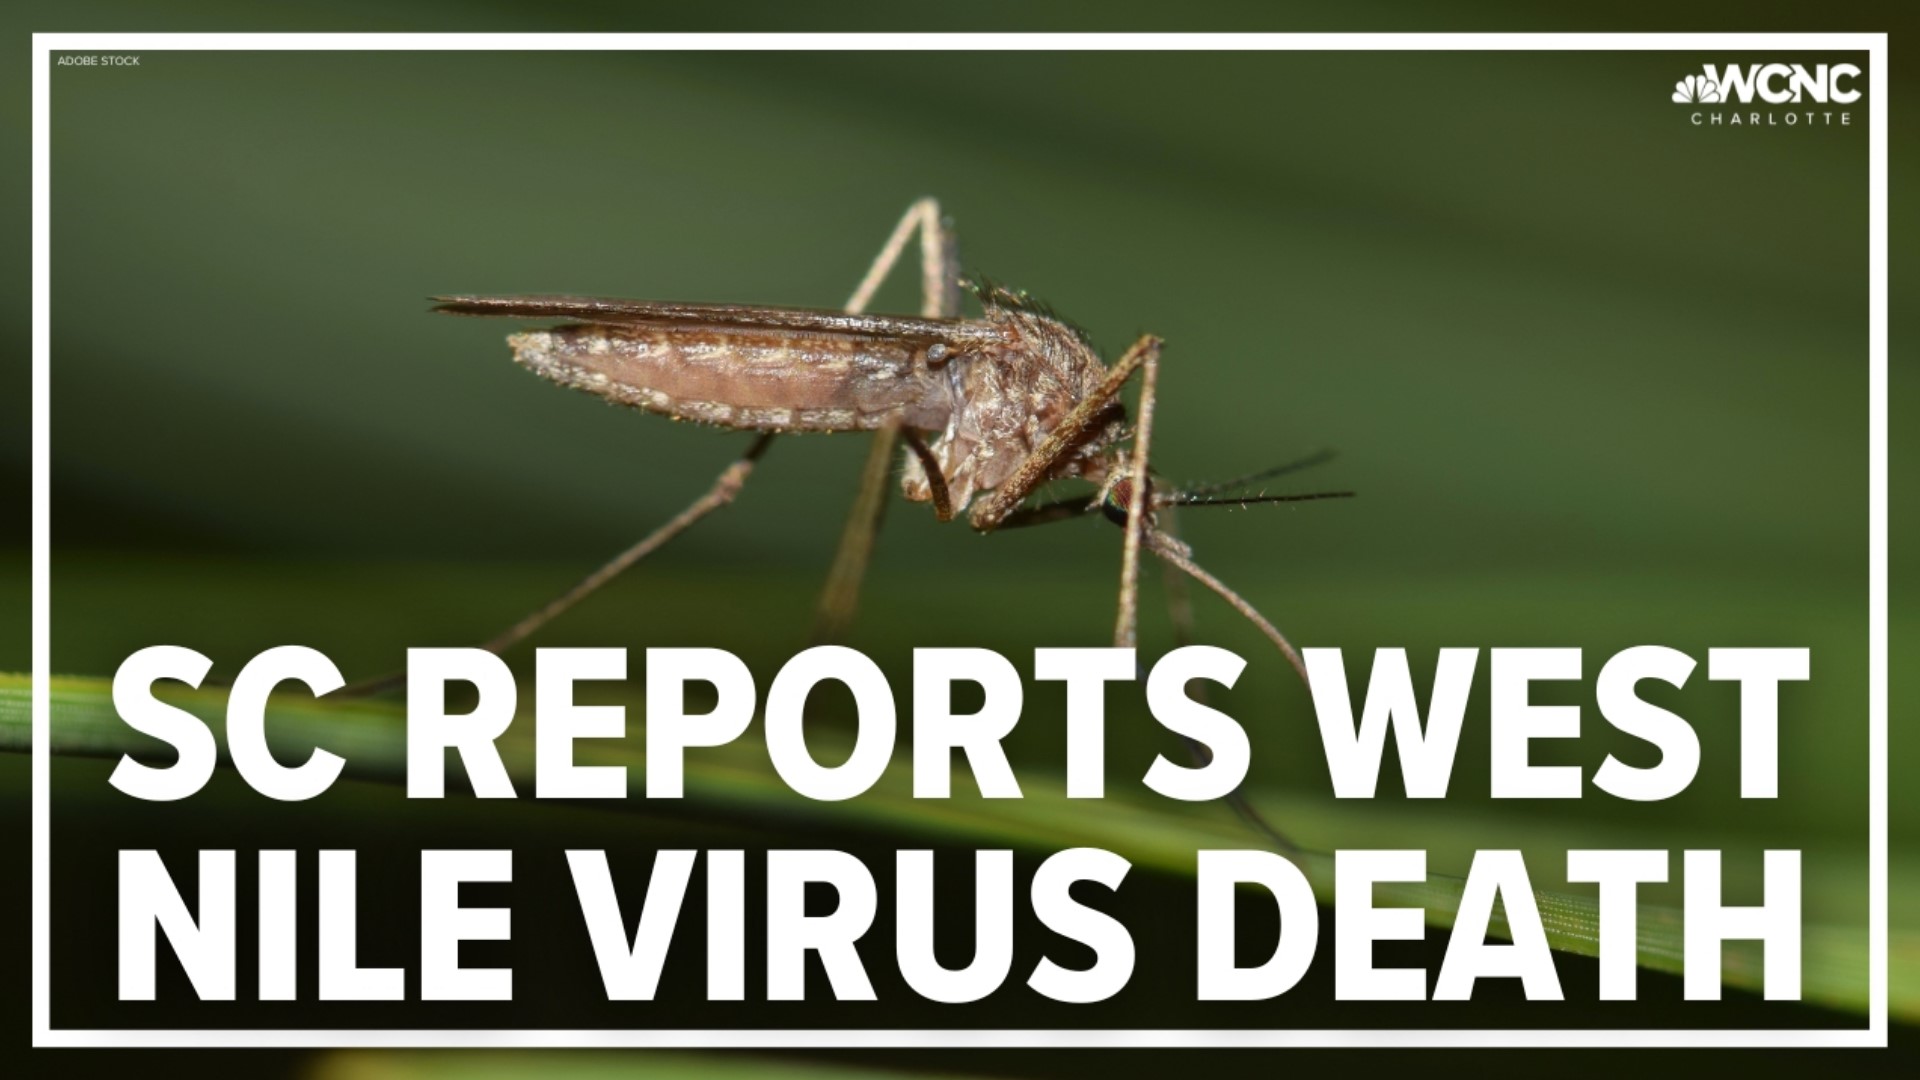 A person in the Midlands has died of the West Nile virus, state health officials confirmed Monday, the first West Nile death in the state this year.